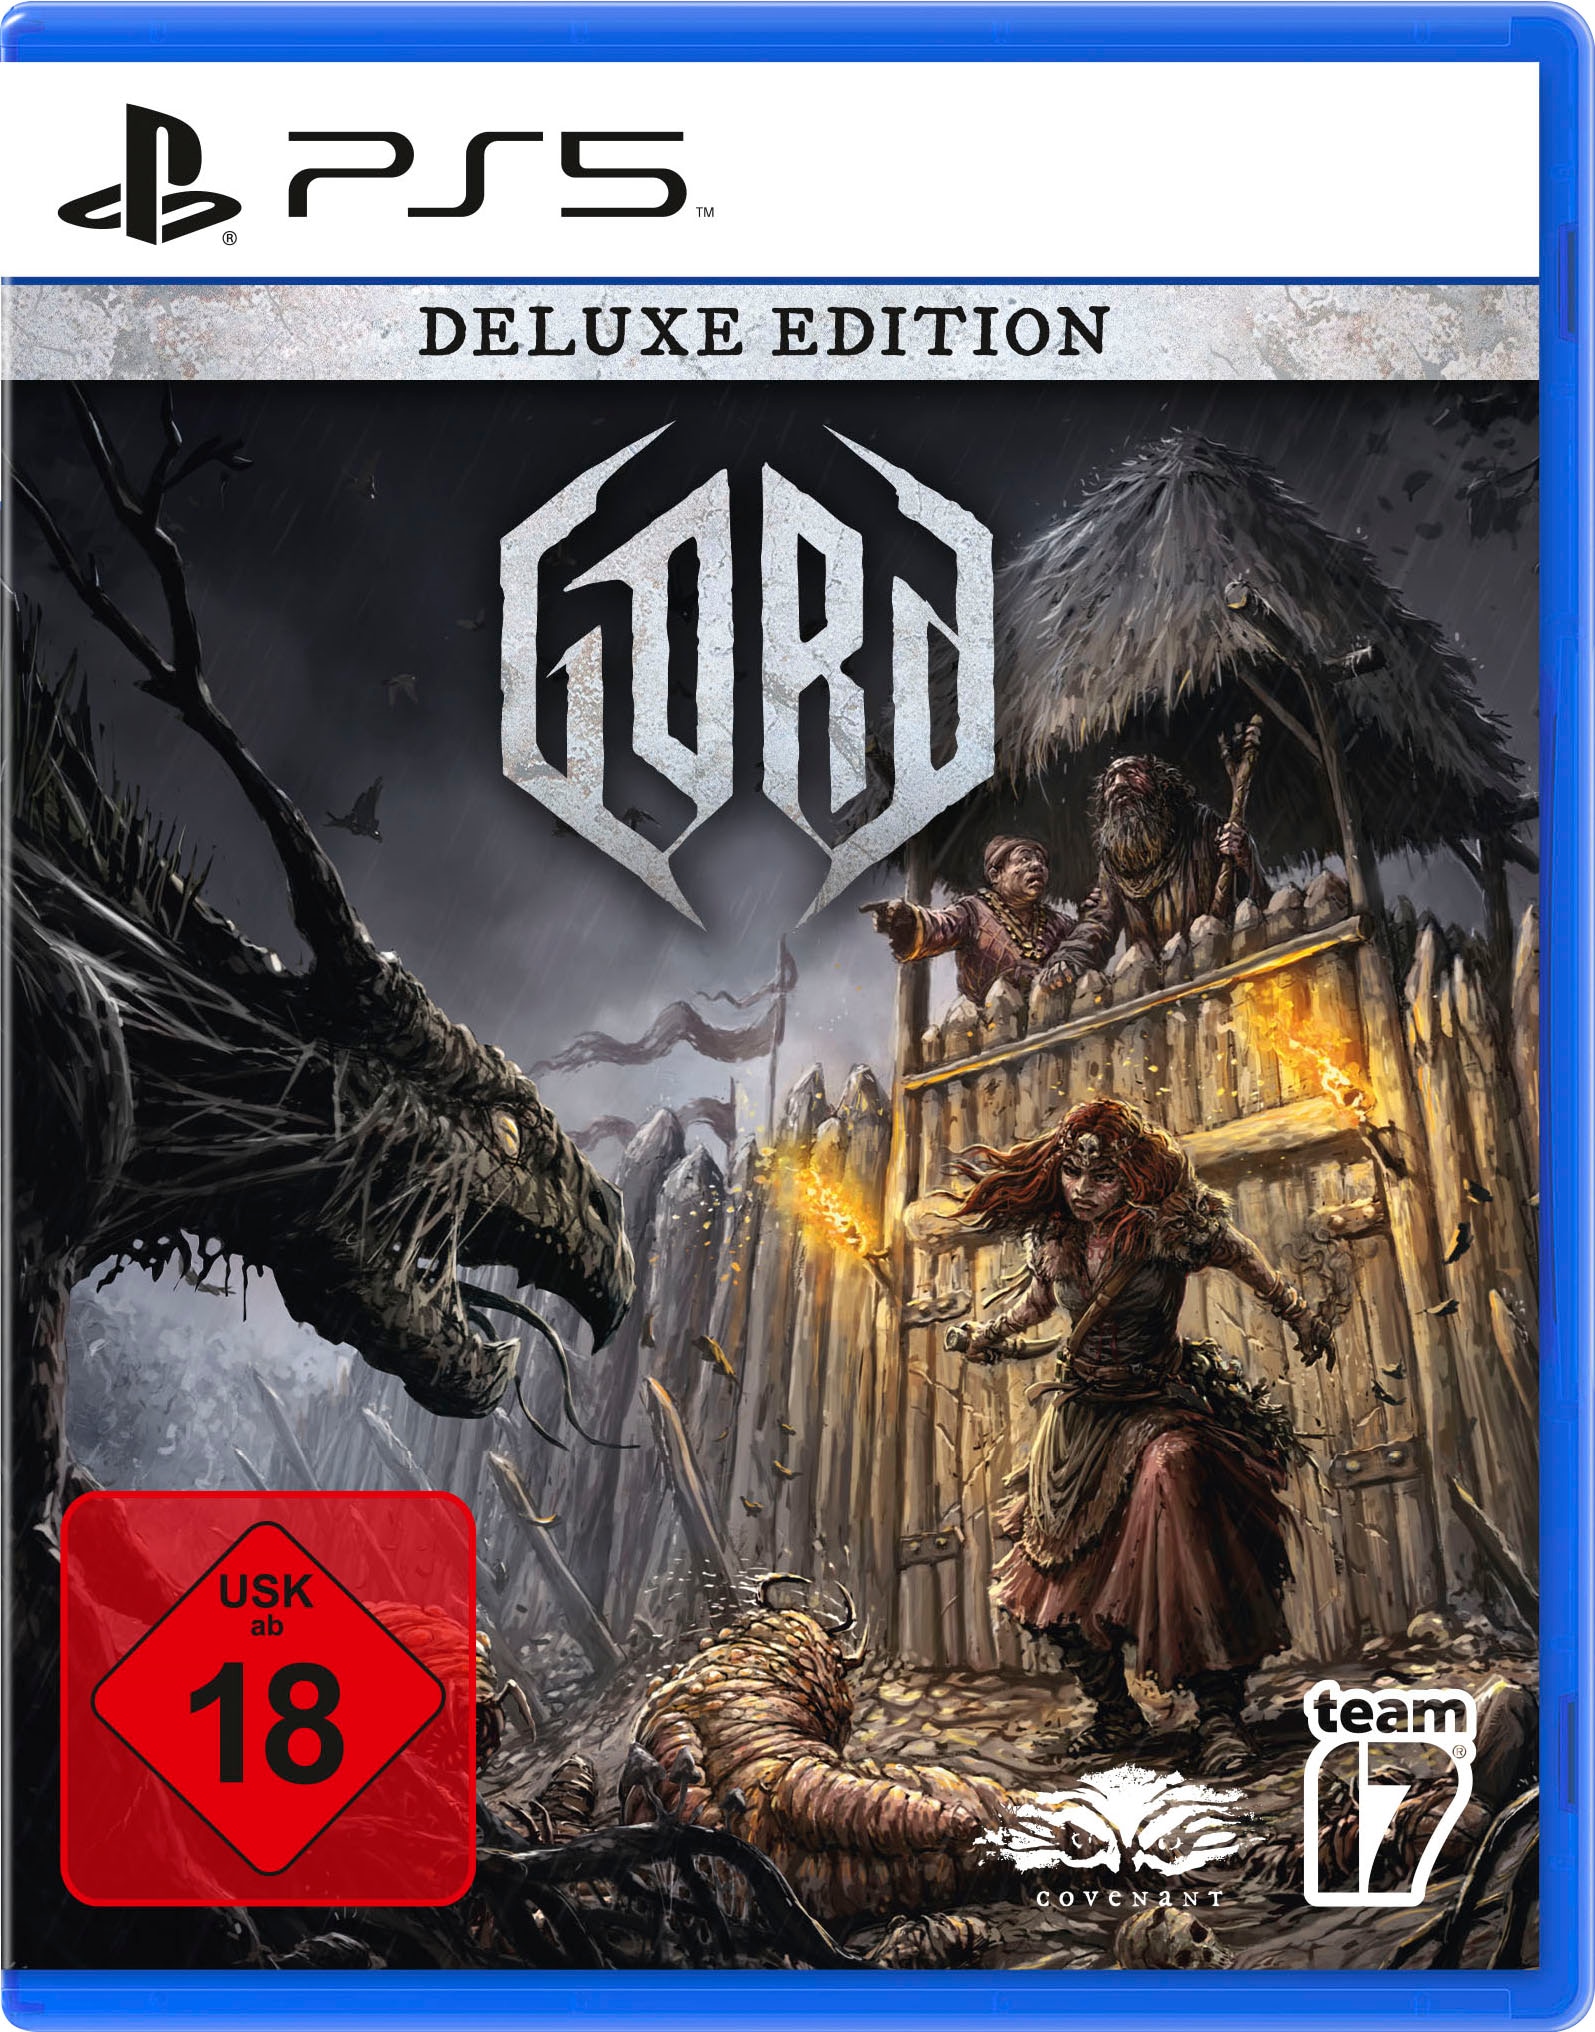 Spielesoftware »Gord Deluxe Edition«, PlayStation 5